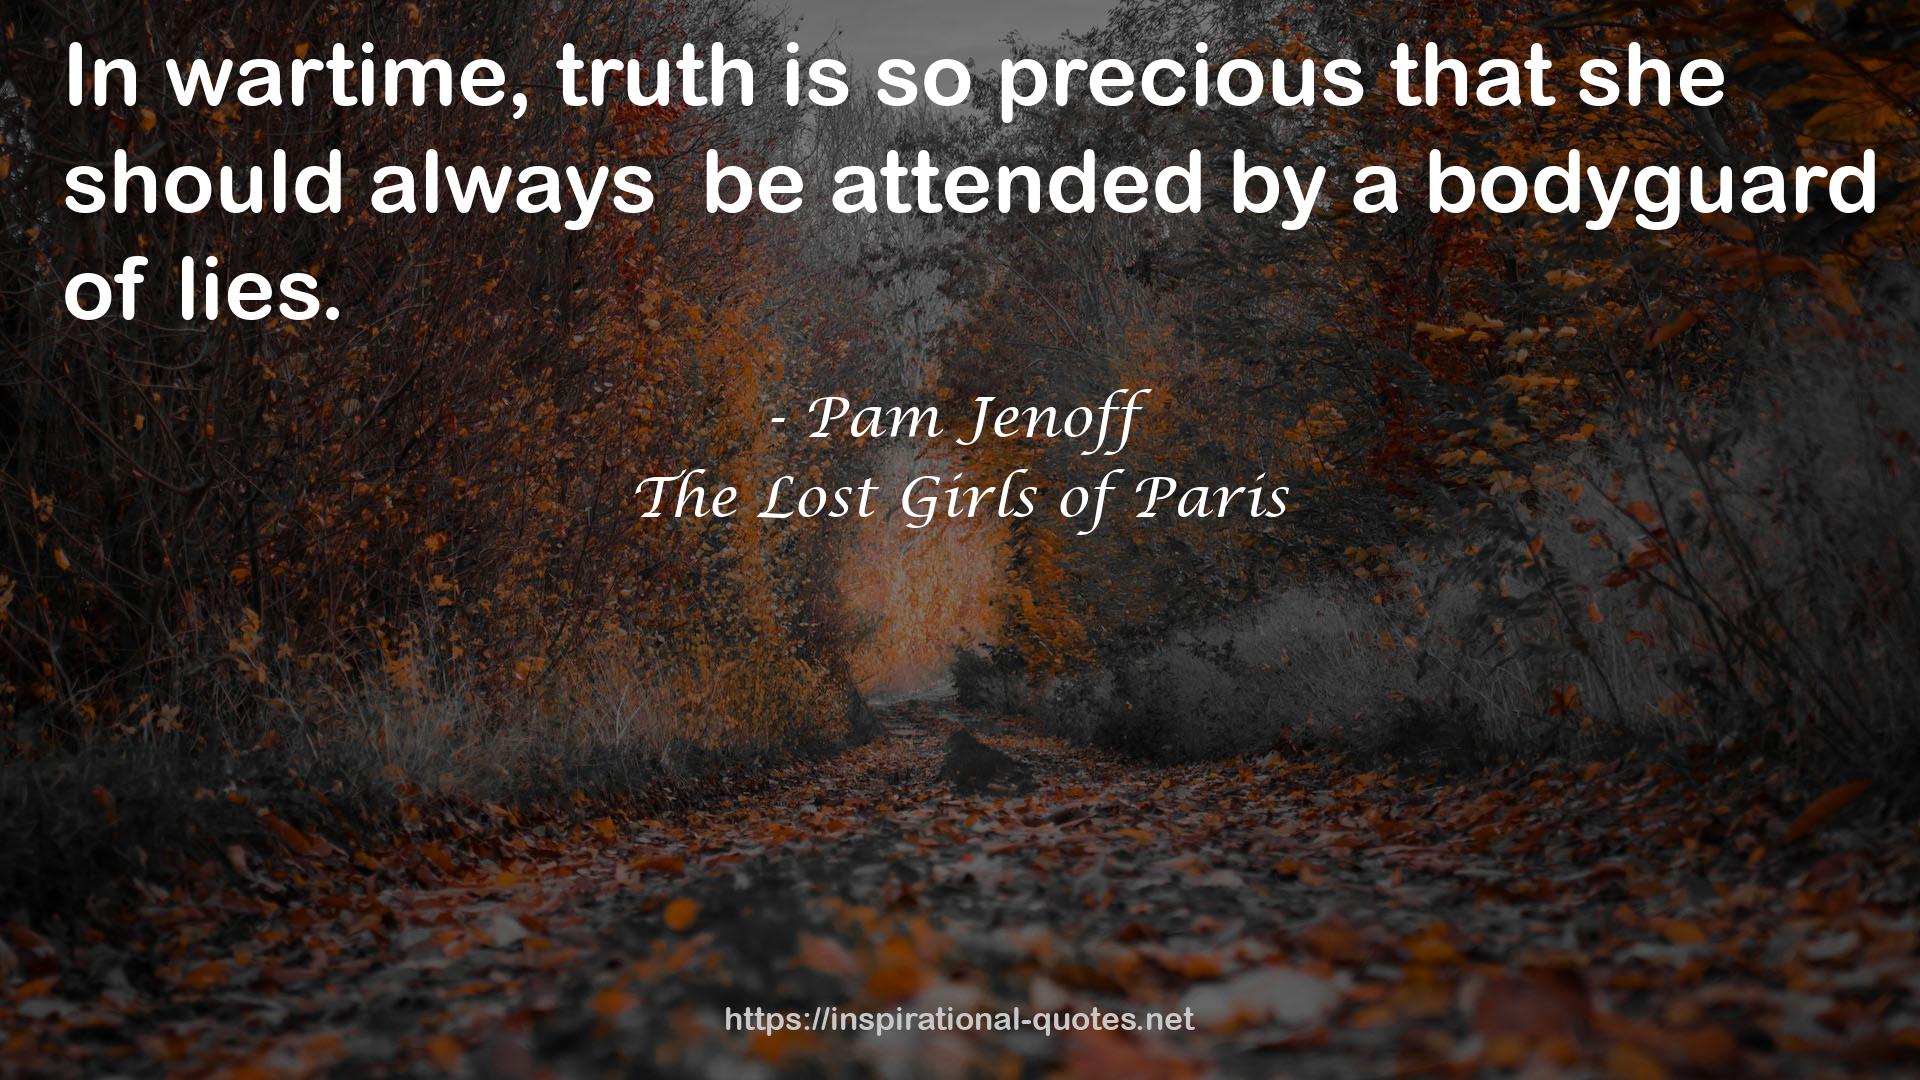 The Lost Girls of Paris QUOTES